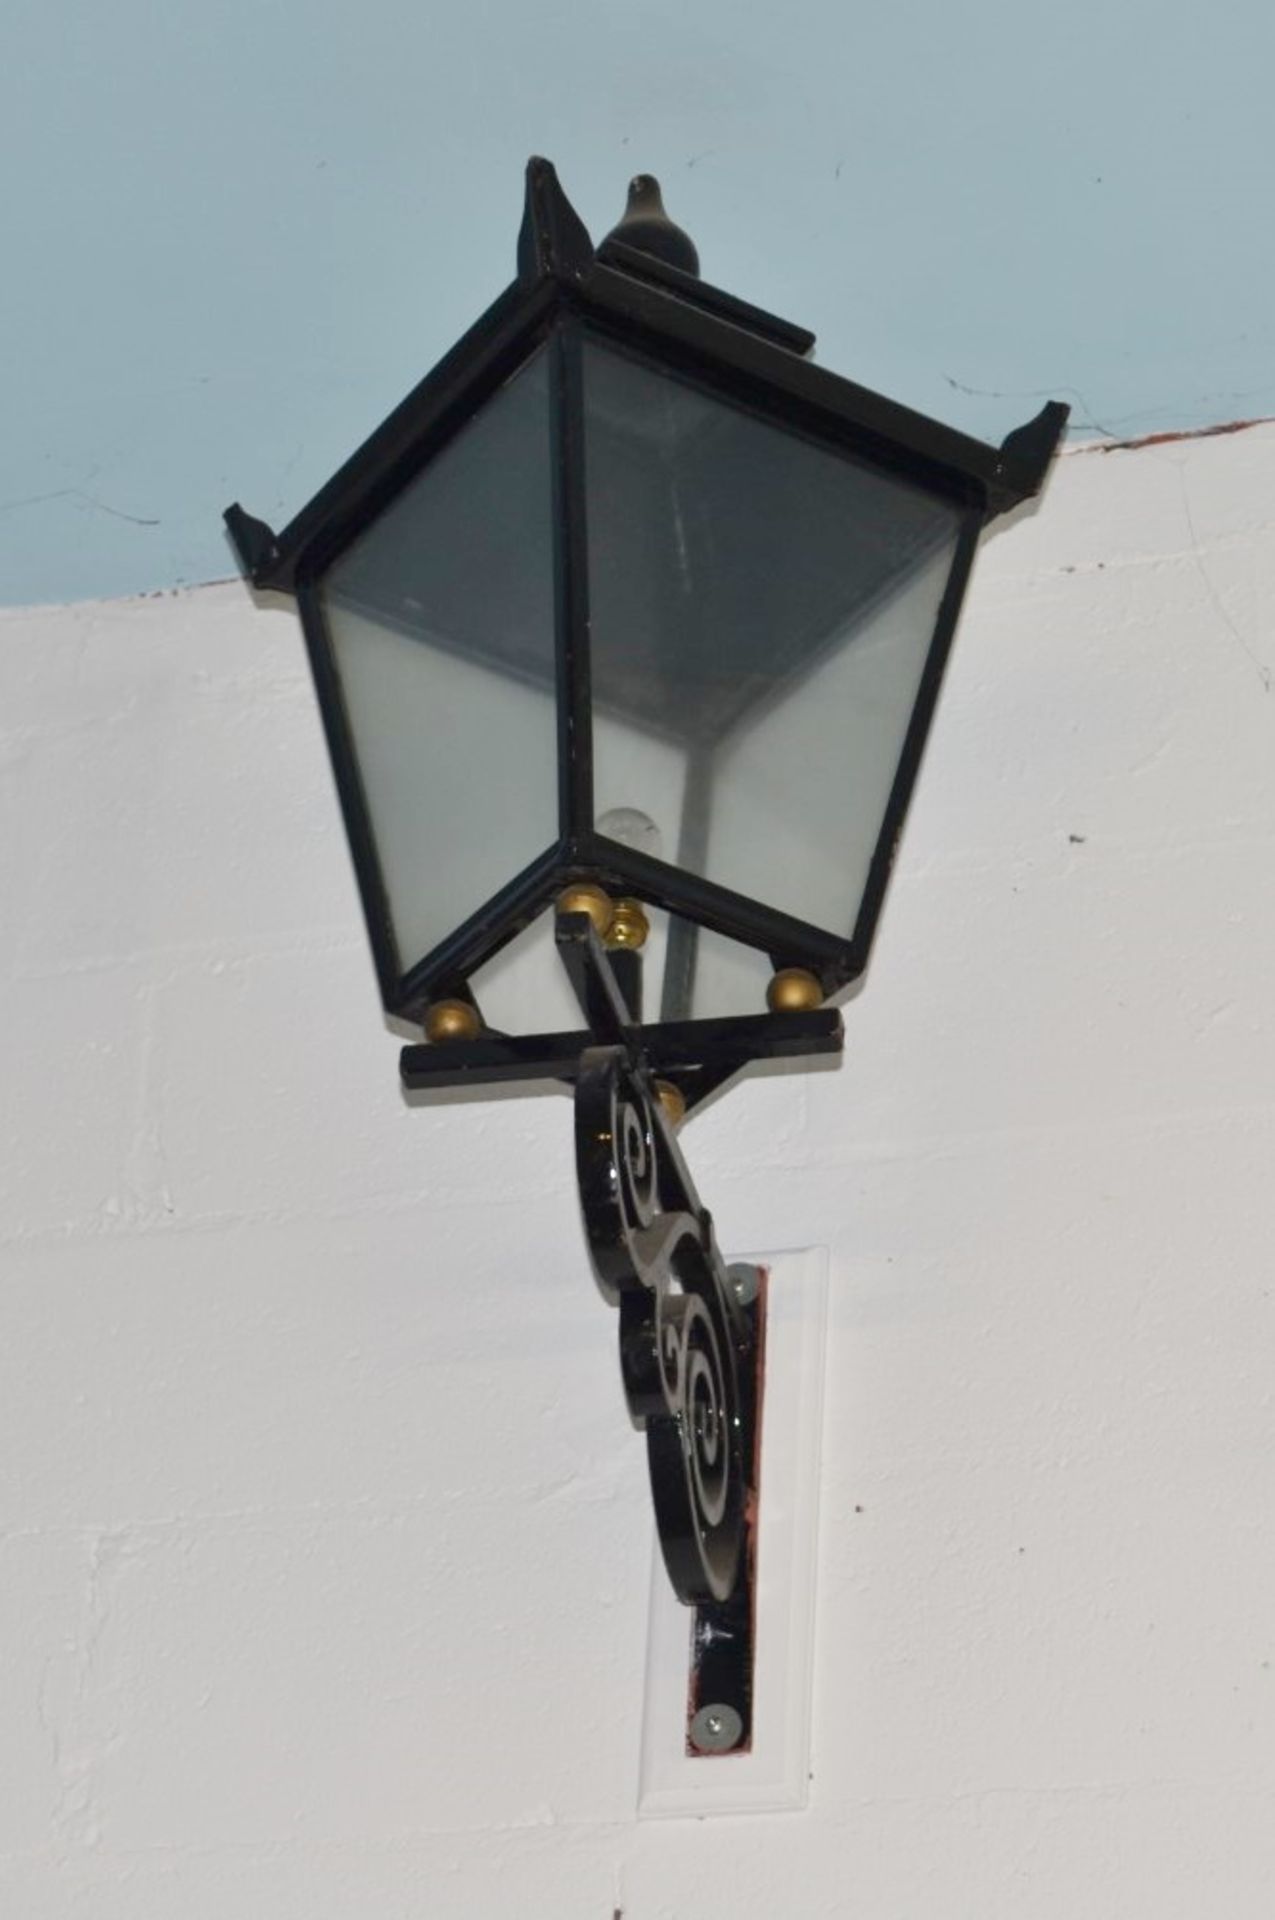 1 x Victorian Style Wall Lantern Light Fitting - Large Size in Black - Overal Height Approx 90 cms - - Image 3 of 4